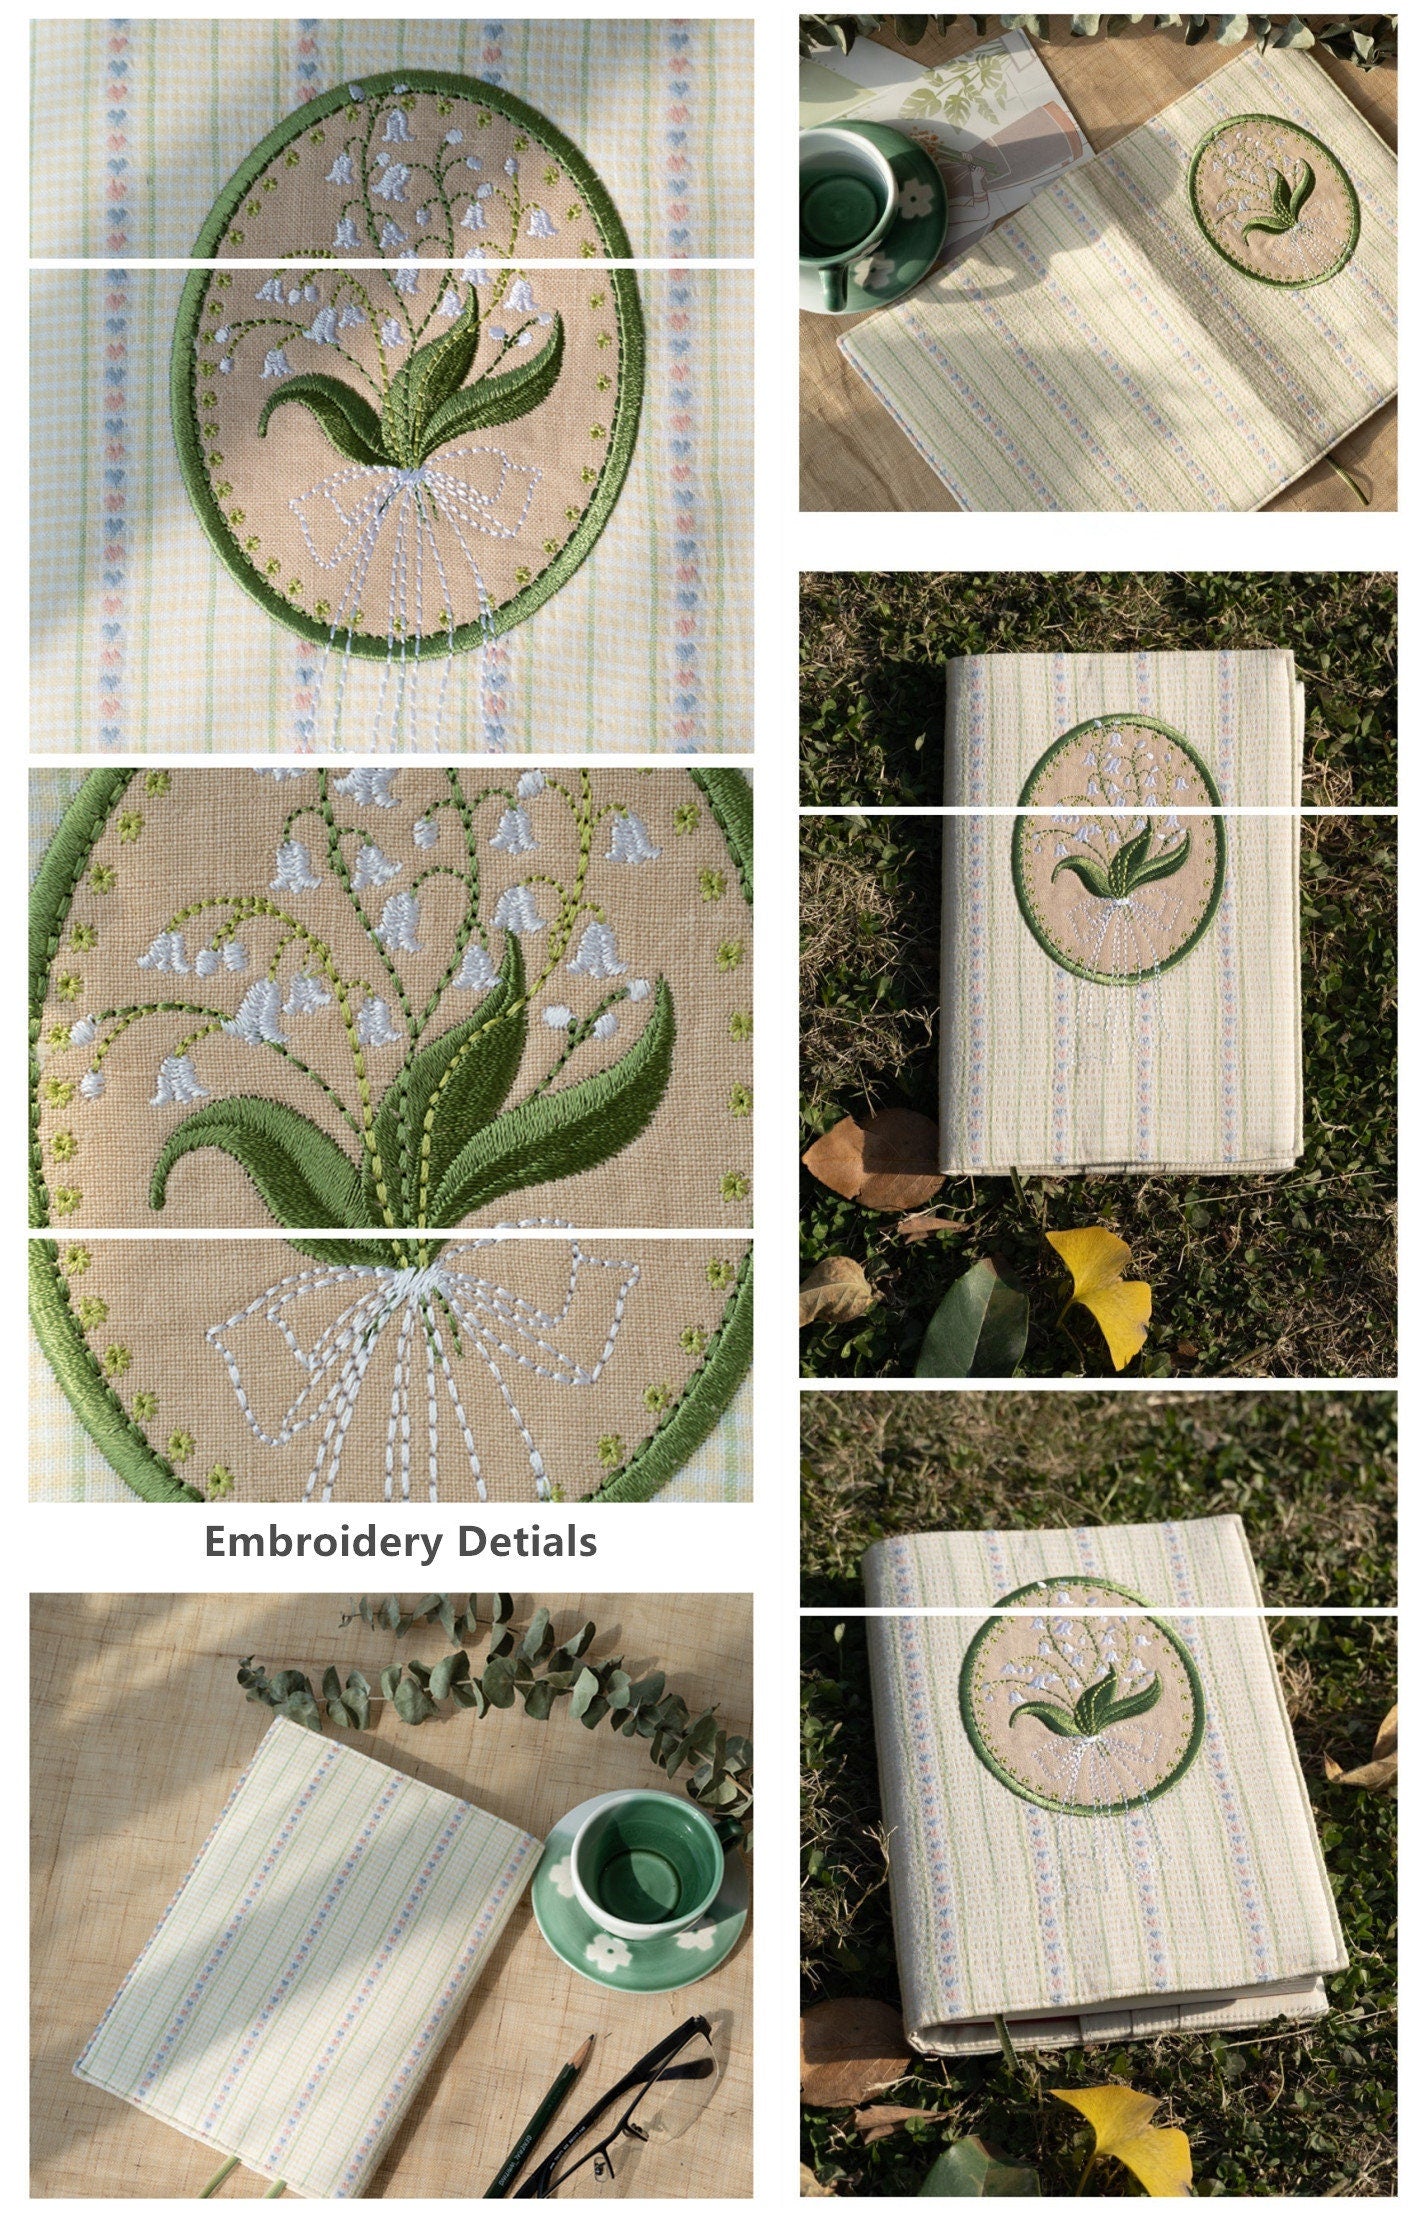 Lily of the Valley Patch Embroidery Book Sleeve Retro A5 A6 B6 Notebook Pocket Handmade Book Jacket Blank Lined Pages Literary Notebook Gift